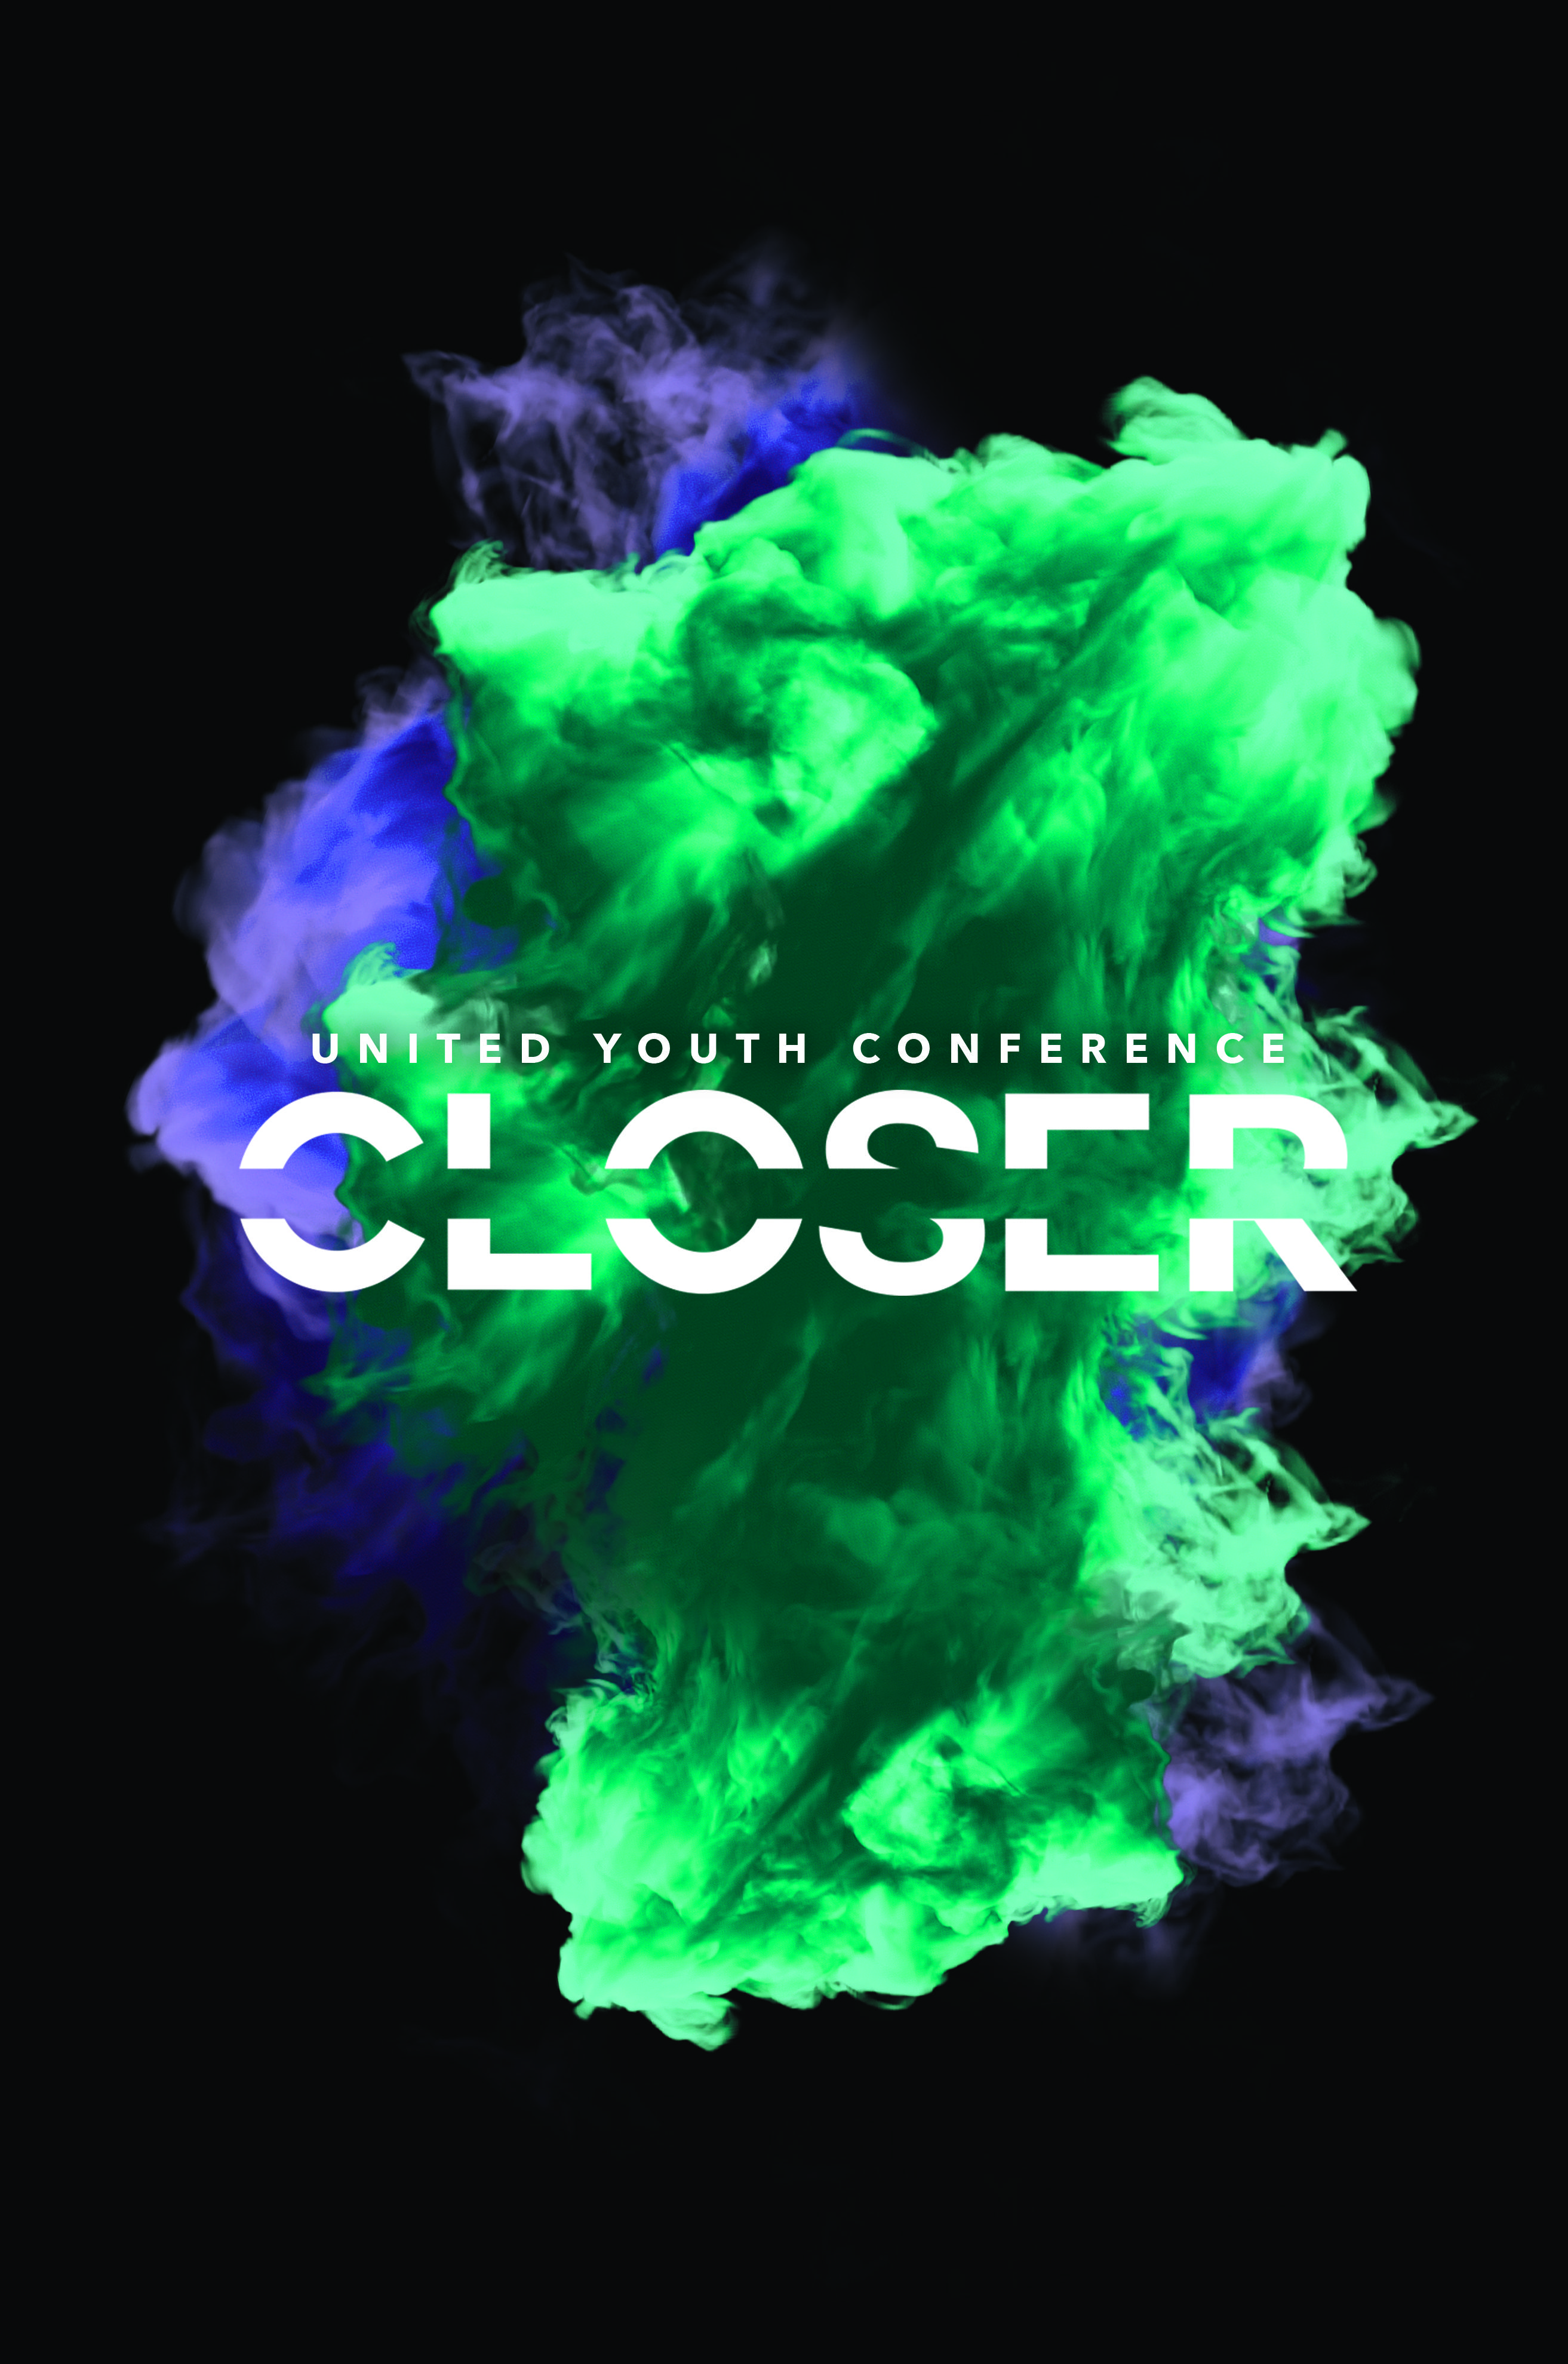 United Youth Conference: CLOSER